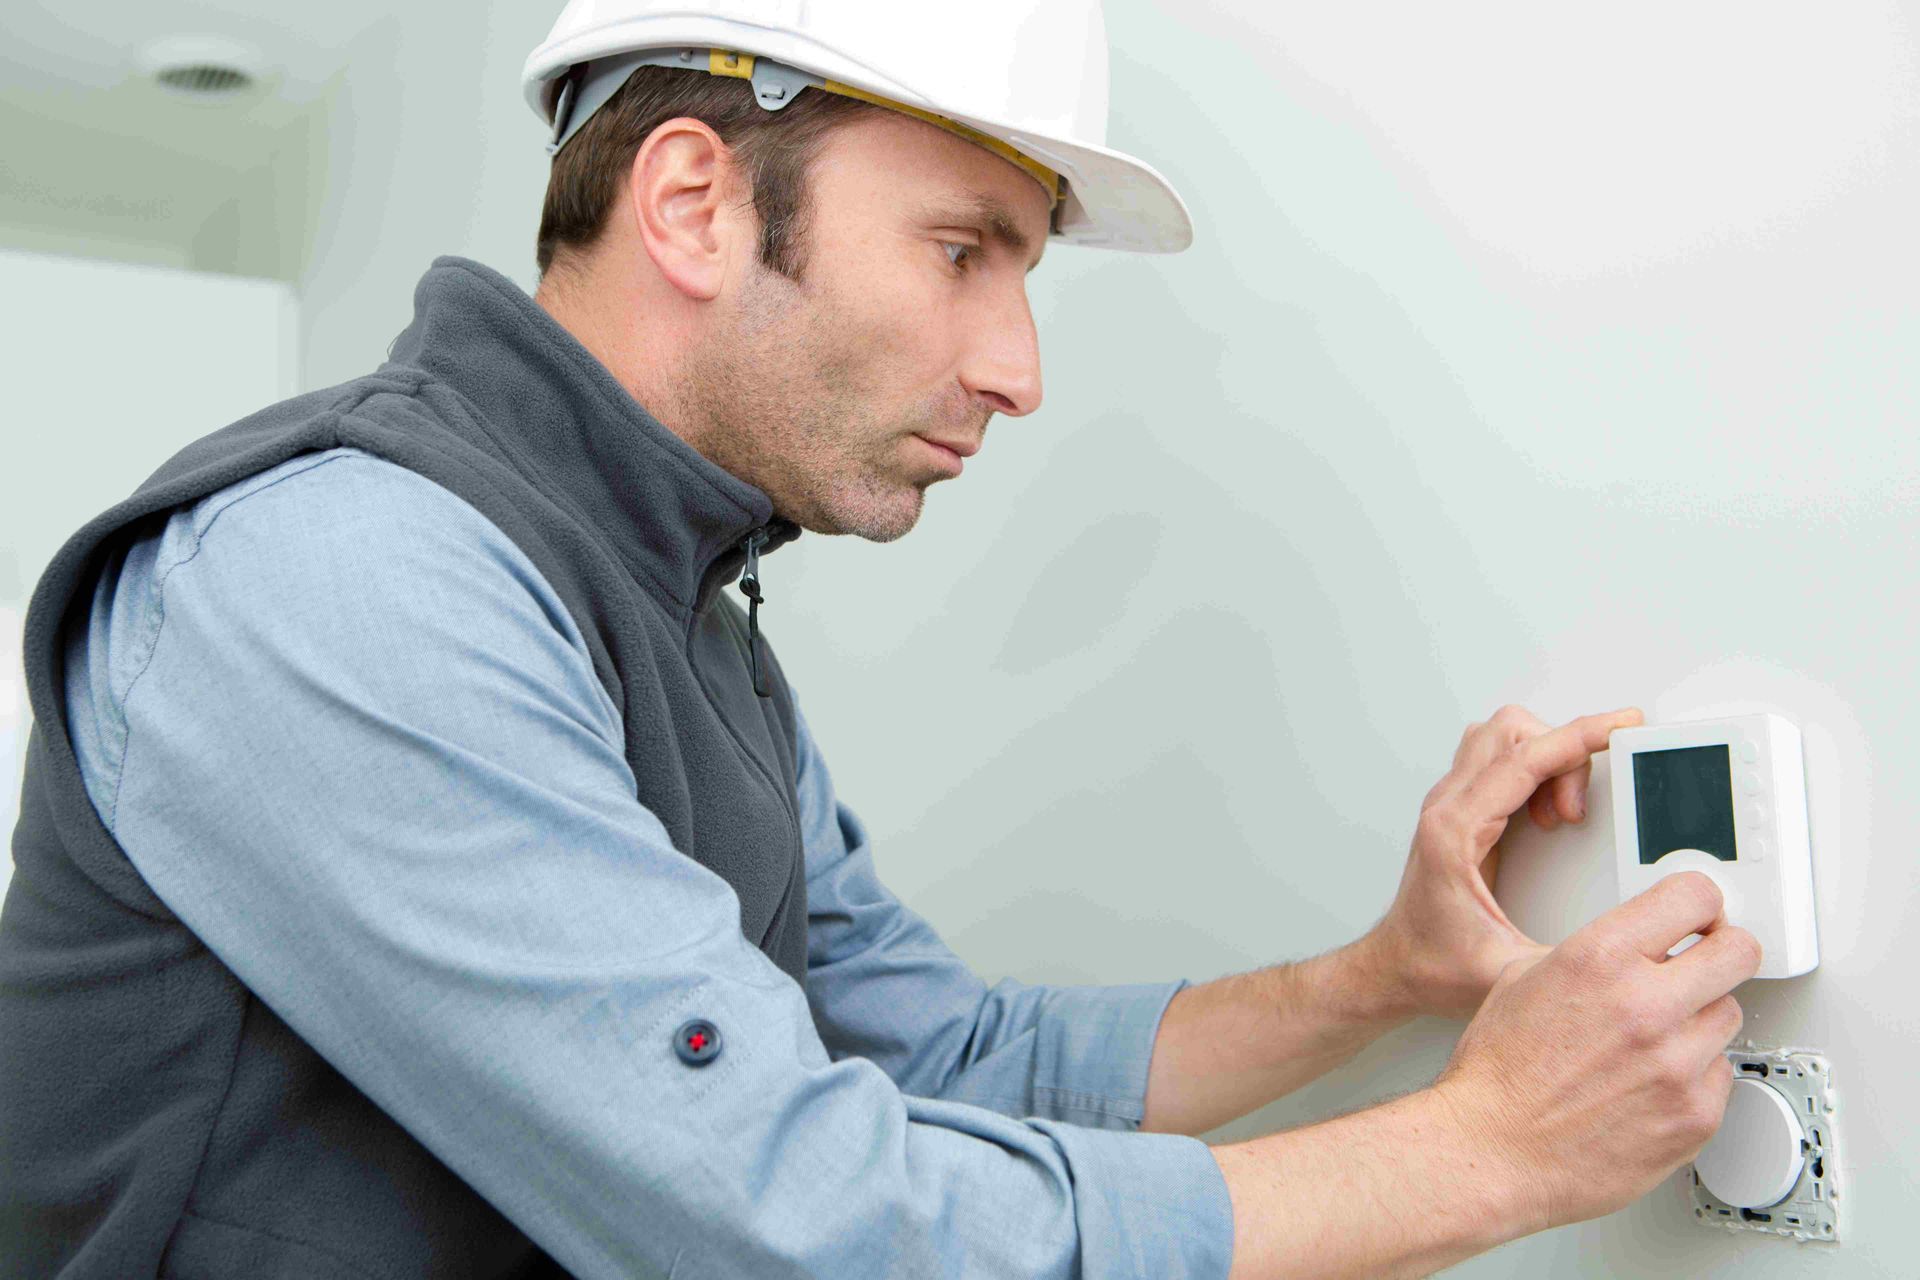 a man in a hard hat is adjusting a thermostat on a wall